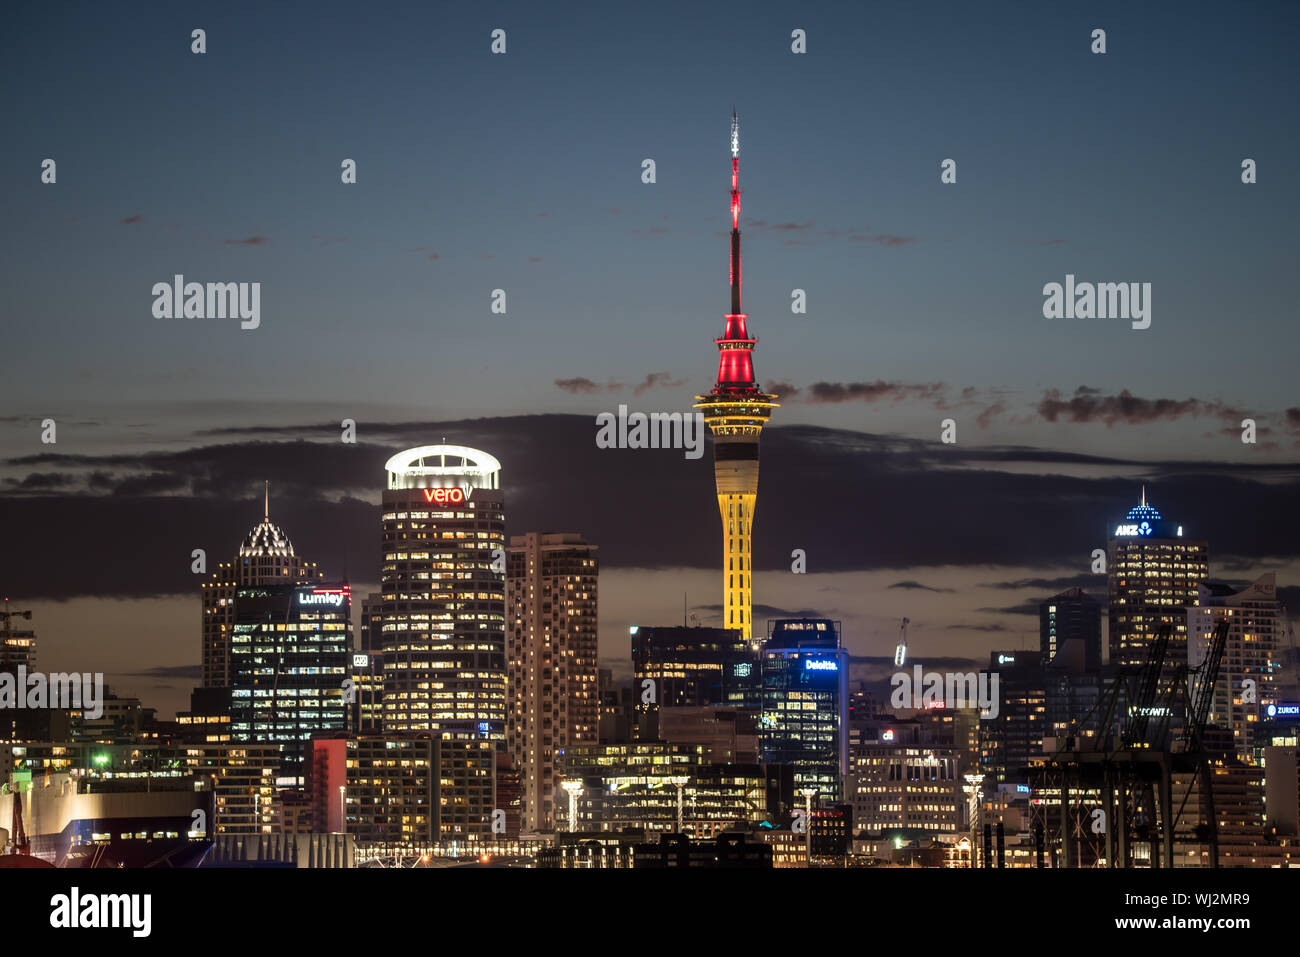 Auckland skyline and city tower, view from Devonport, at sunset Stock Photo